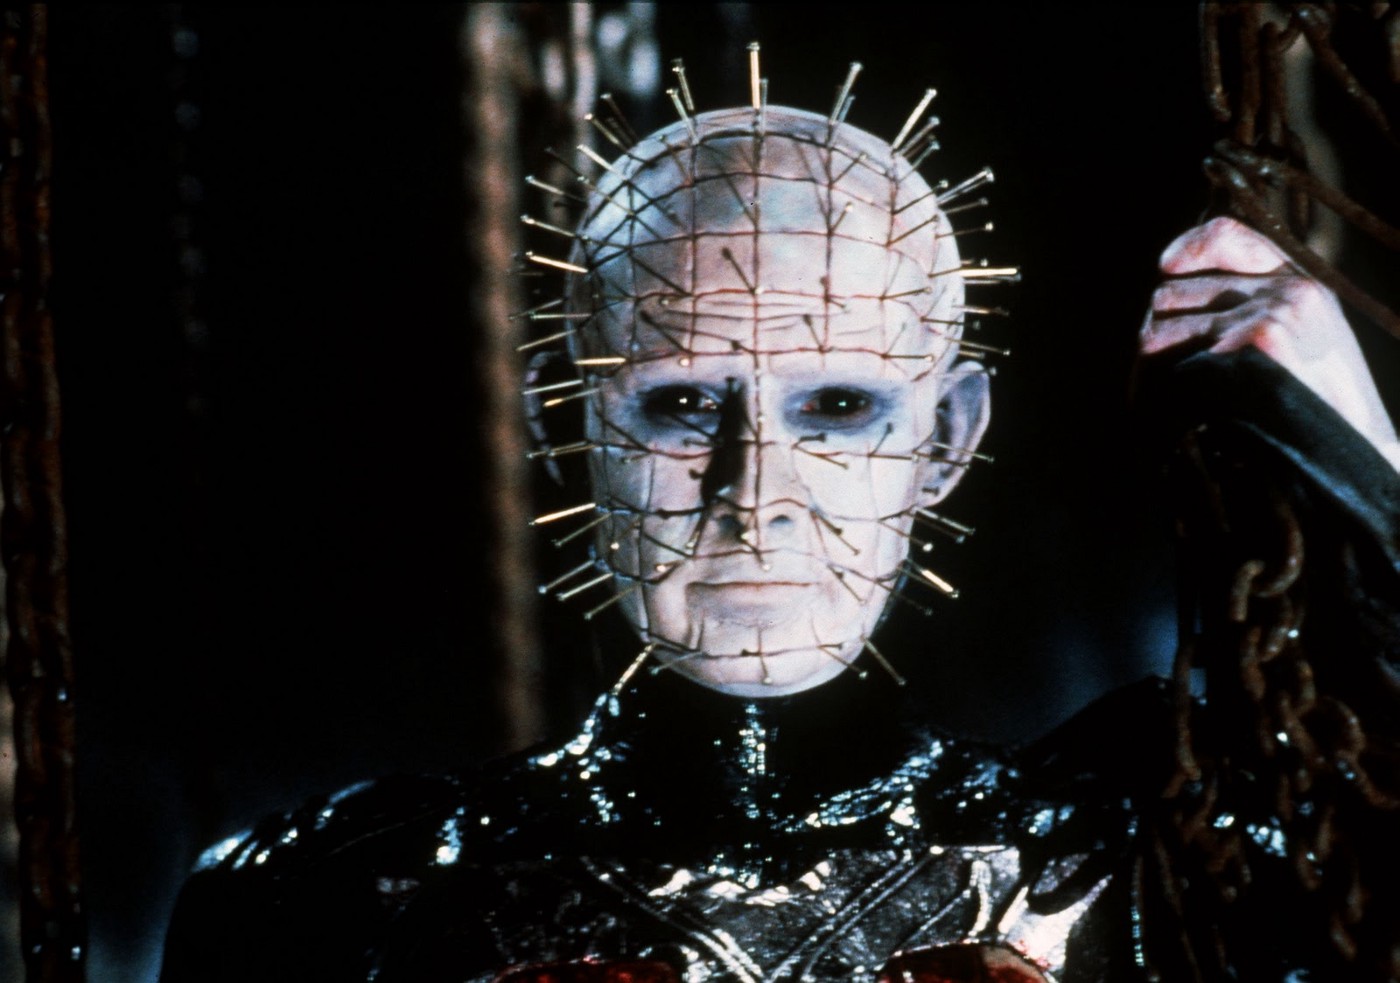 Hellraiser was once thrust into the world of Sherlock Holmes!